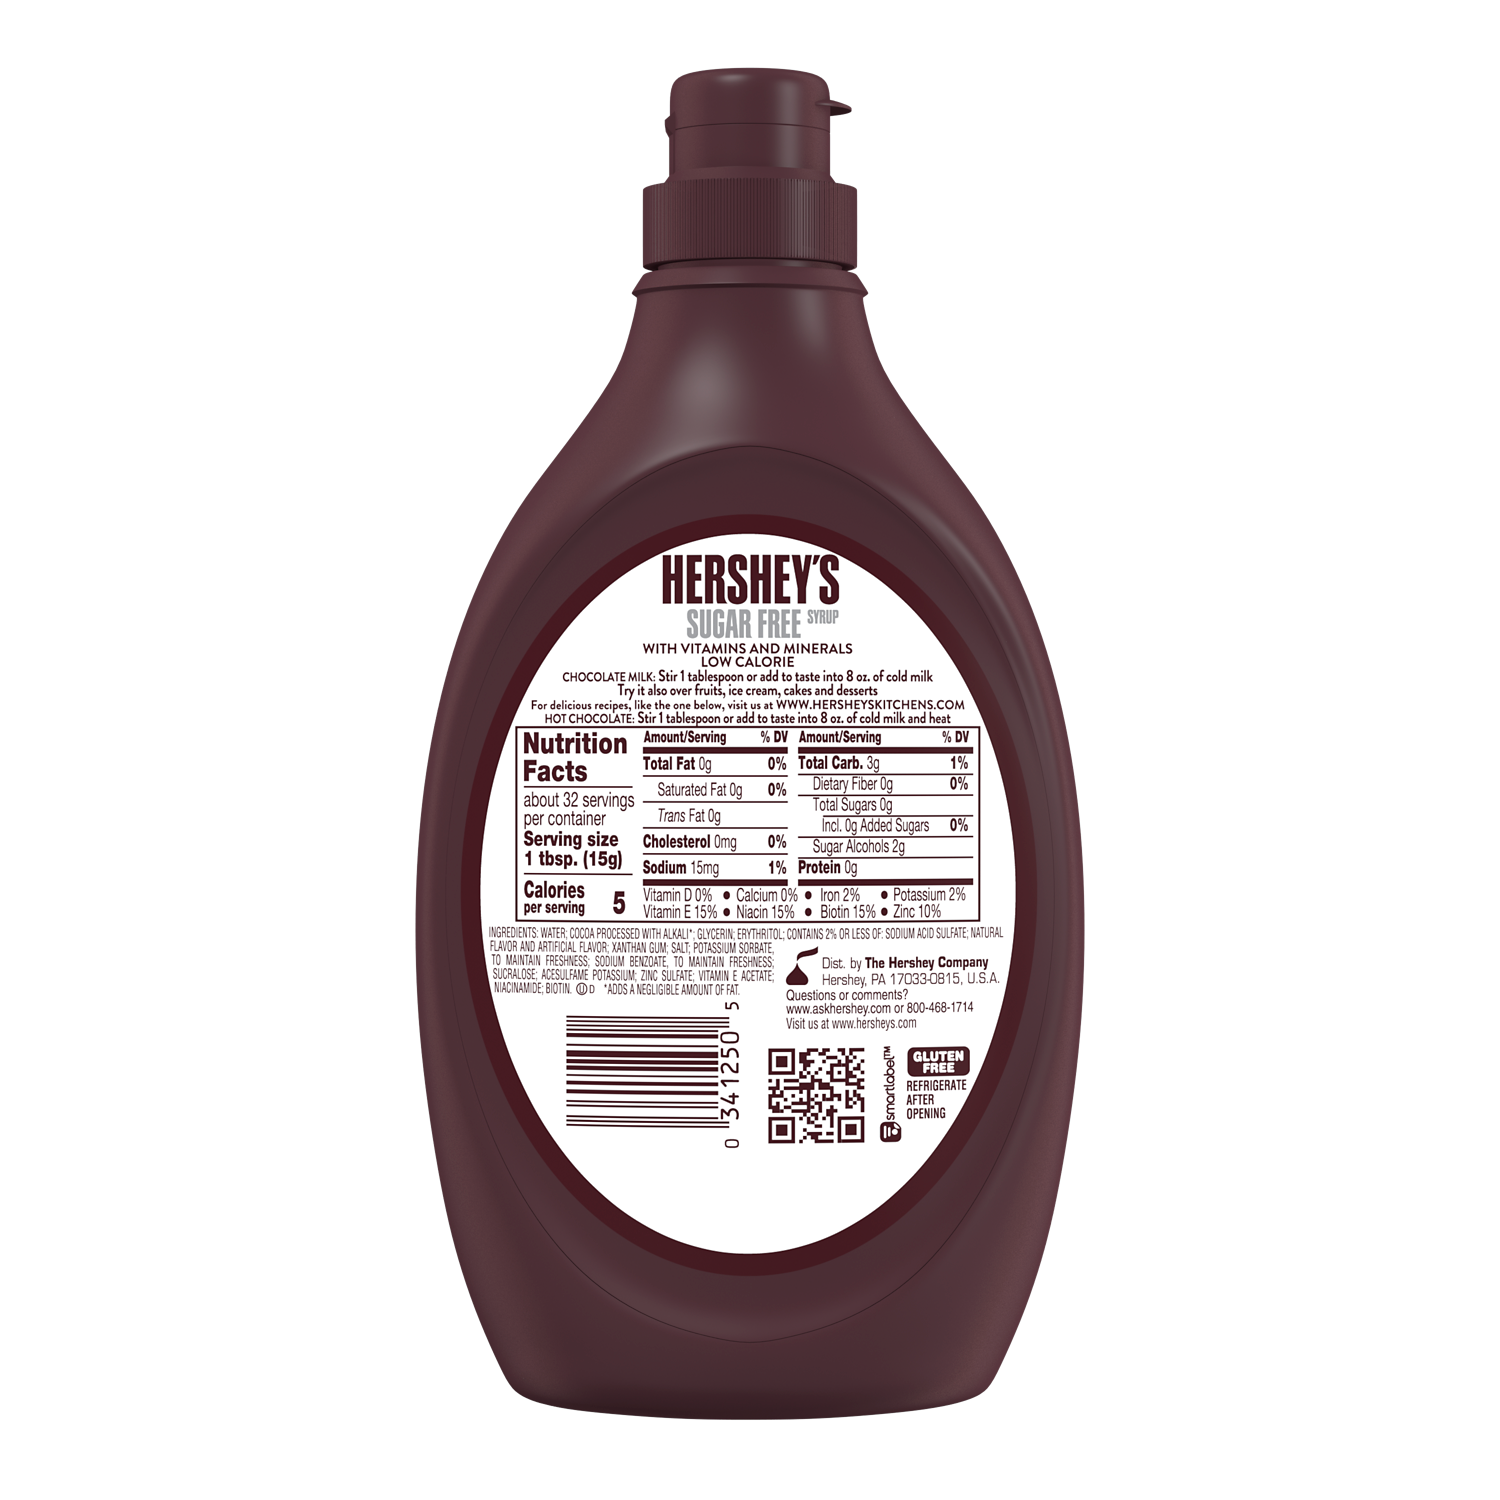 HERSHEY'S Sugar Free Chocolate Syrup, 17.5 oz bottle - Back of Package